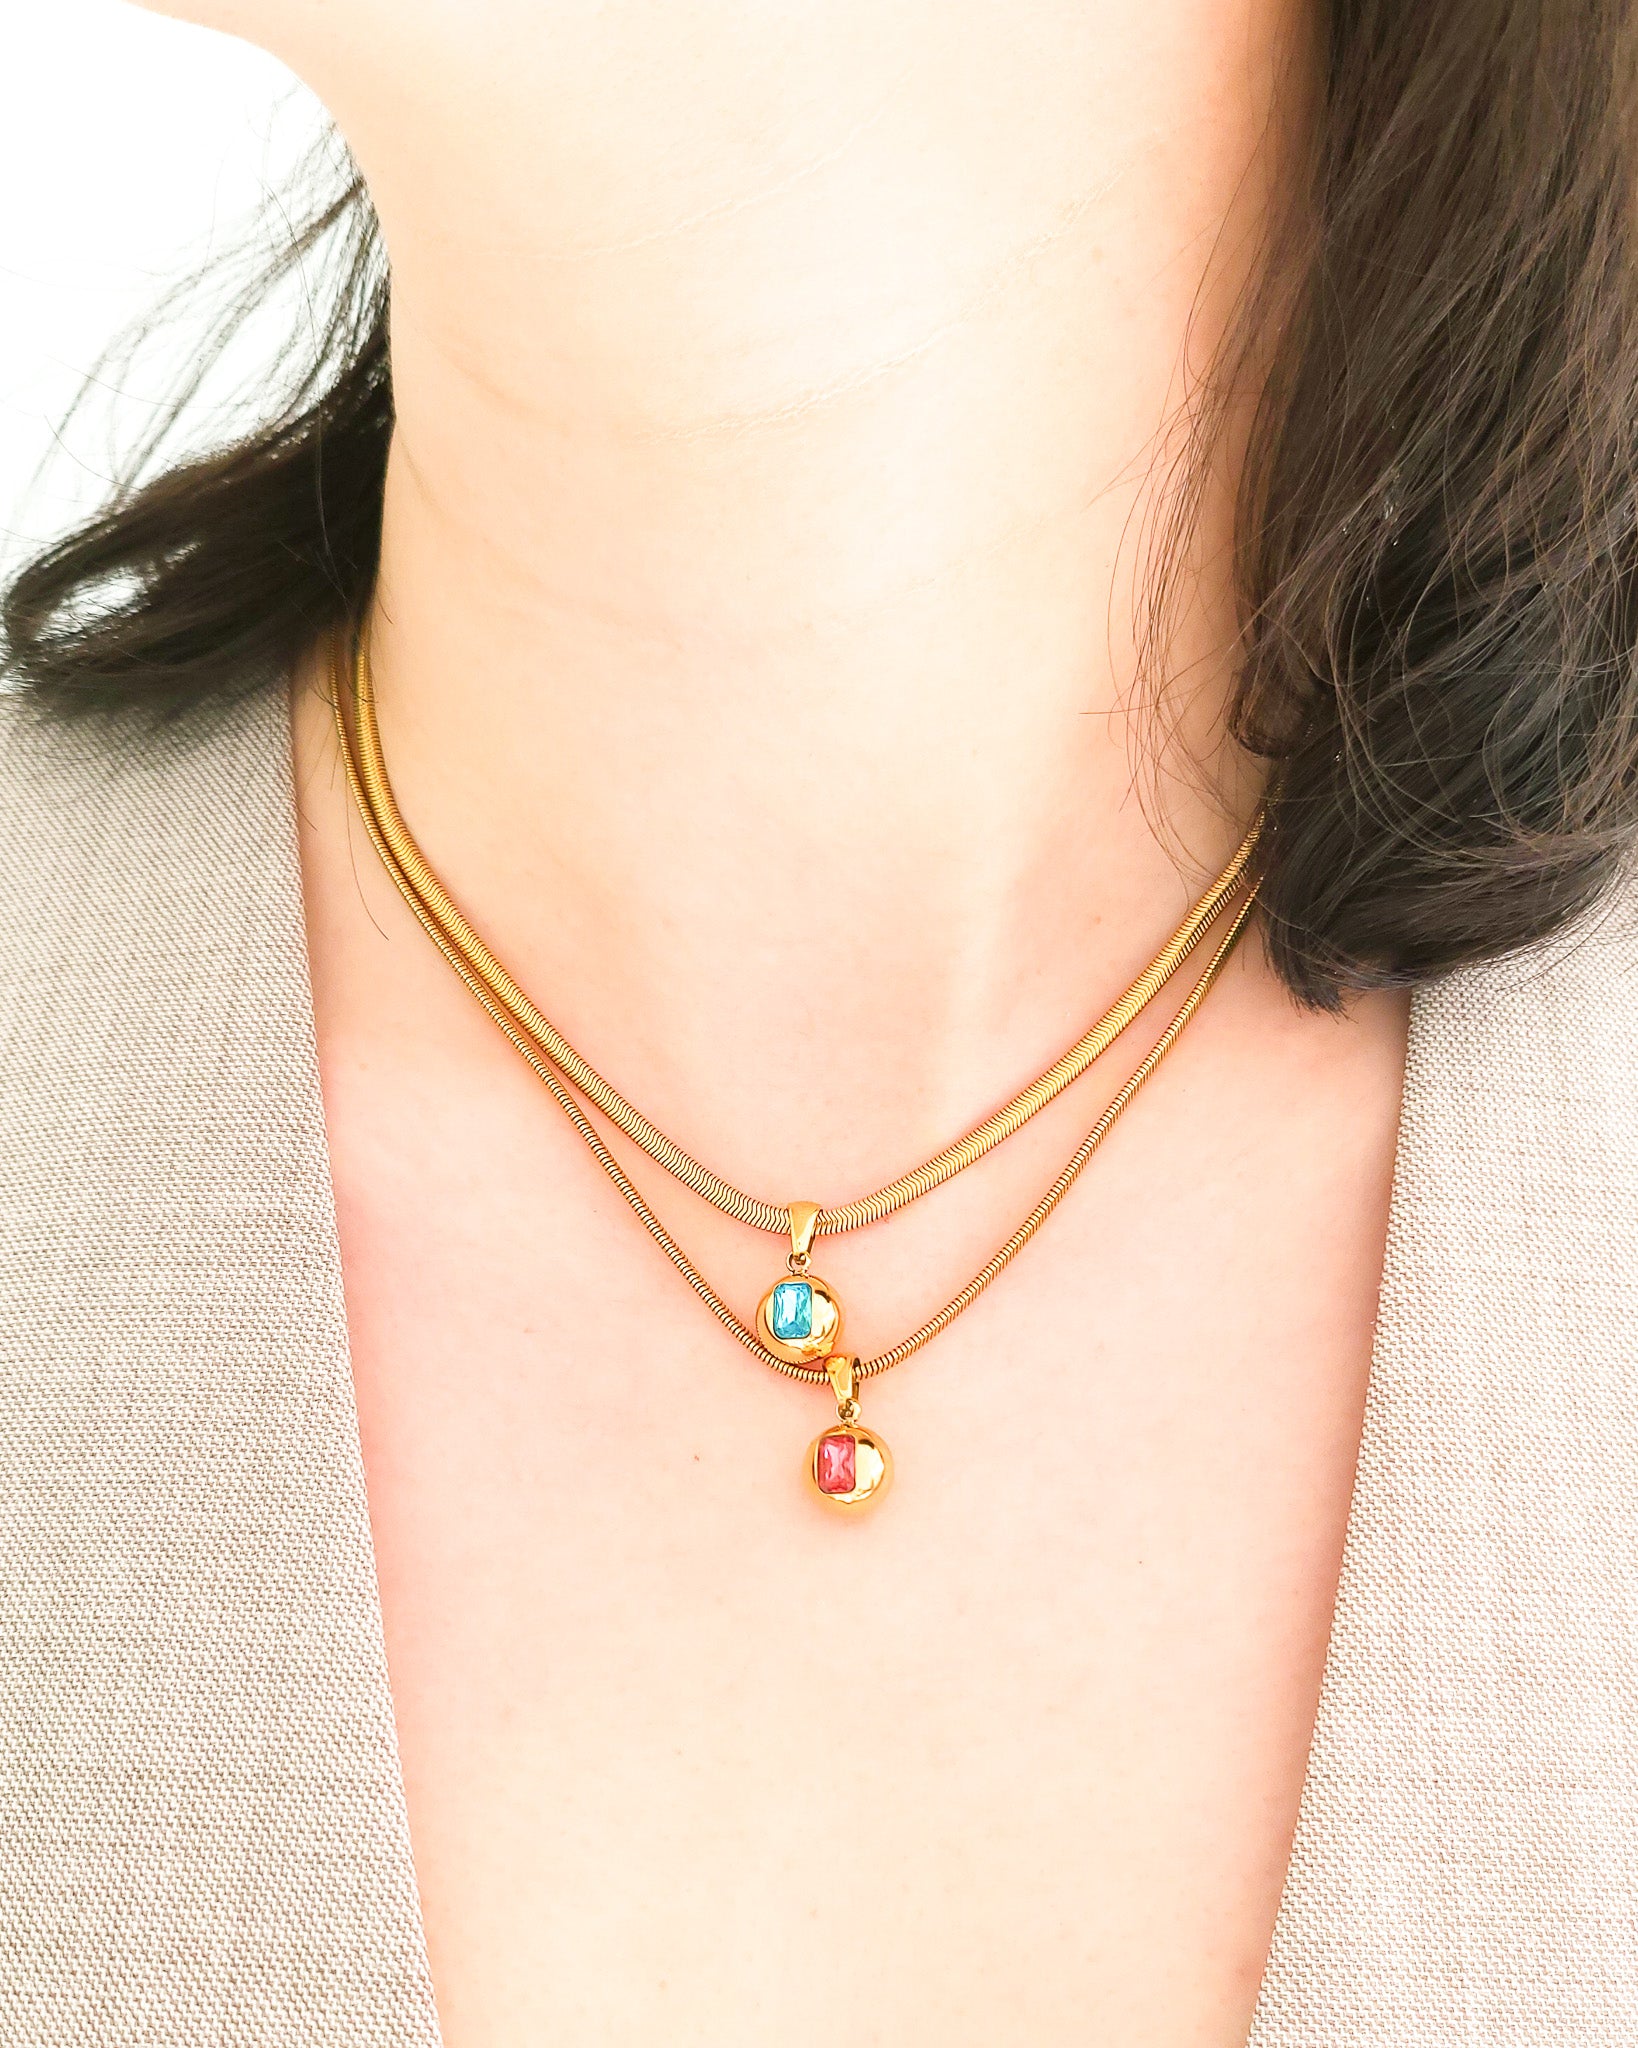 Gold Ball Pendant with Blue Zirconia Necklace